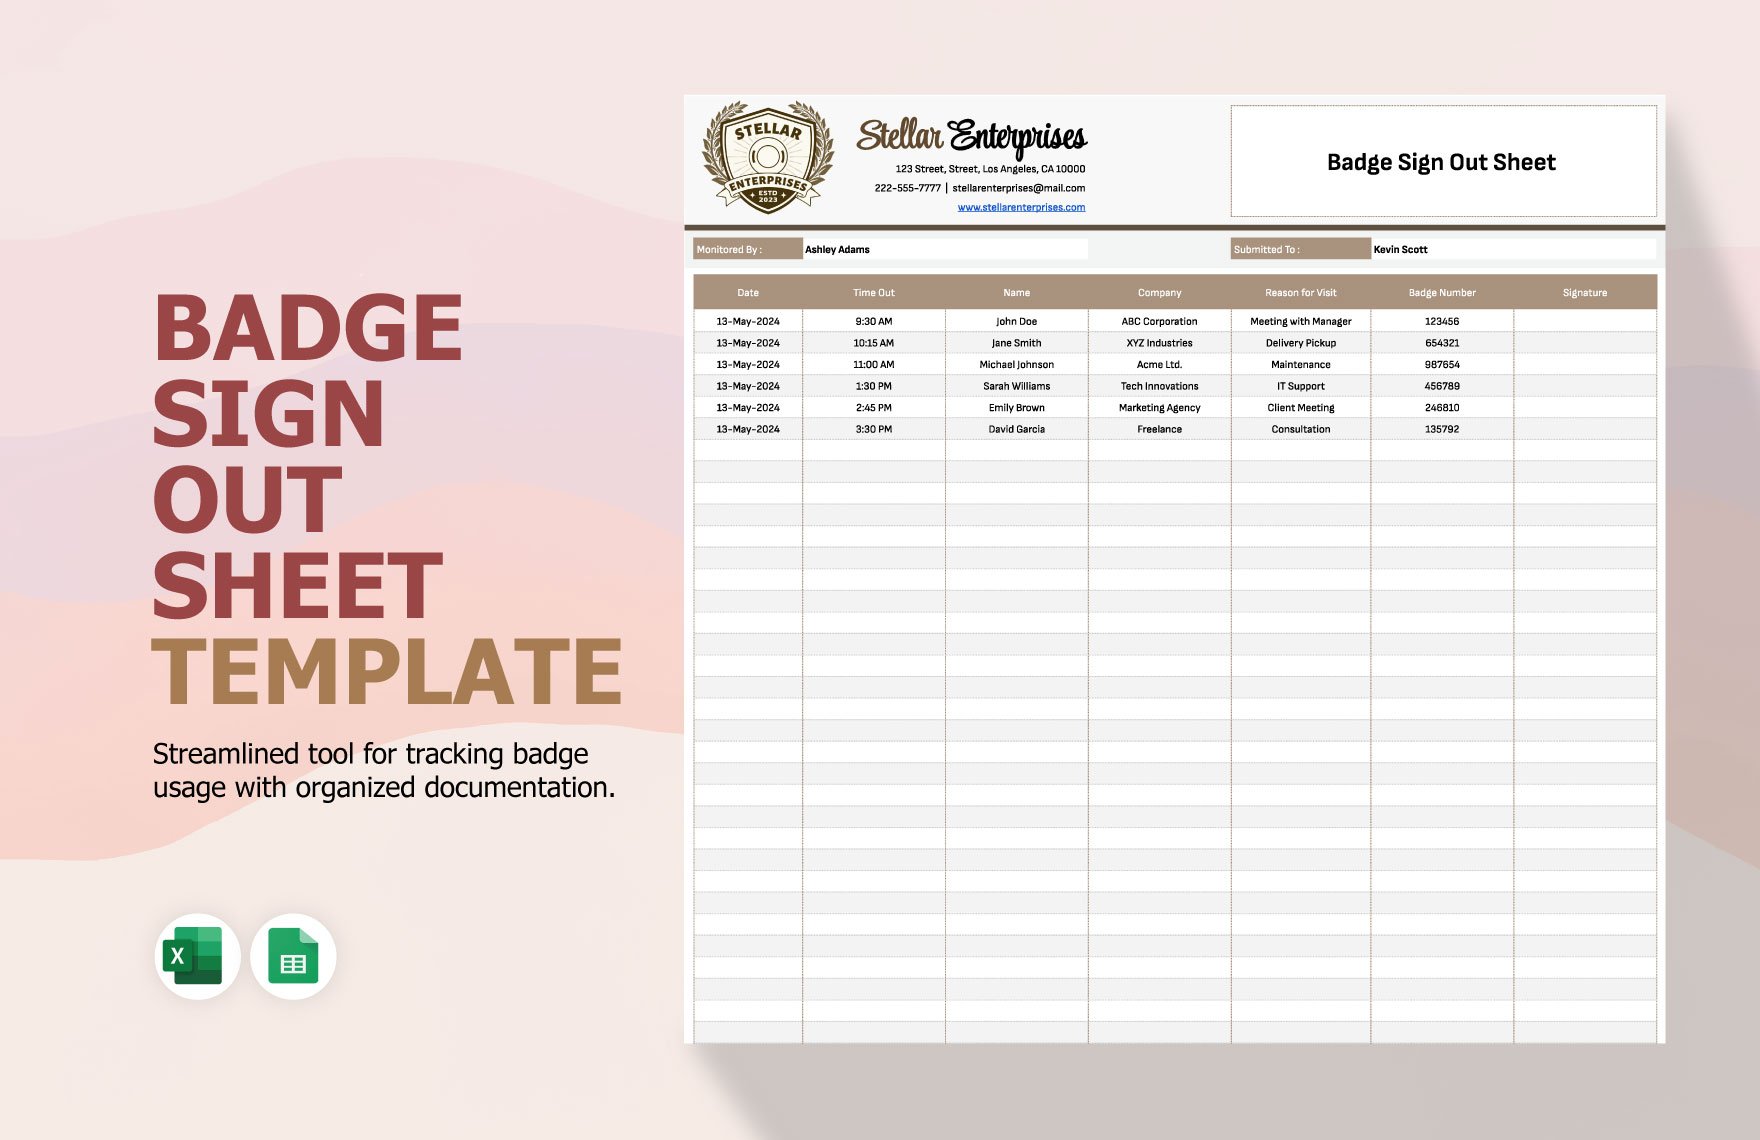 Badge Sign Out Sheet Template in Excel, Google Sheets